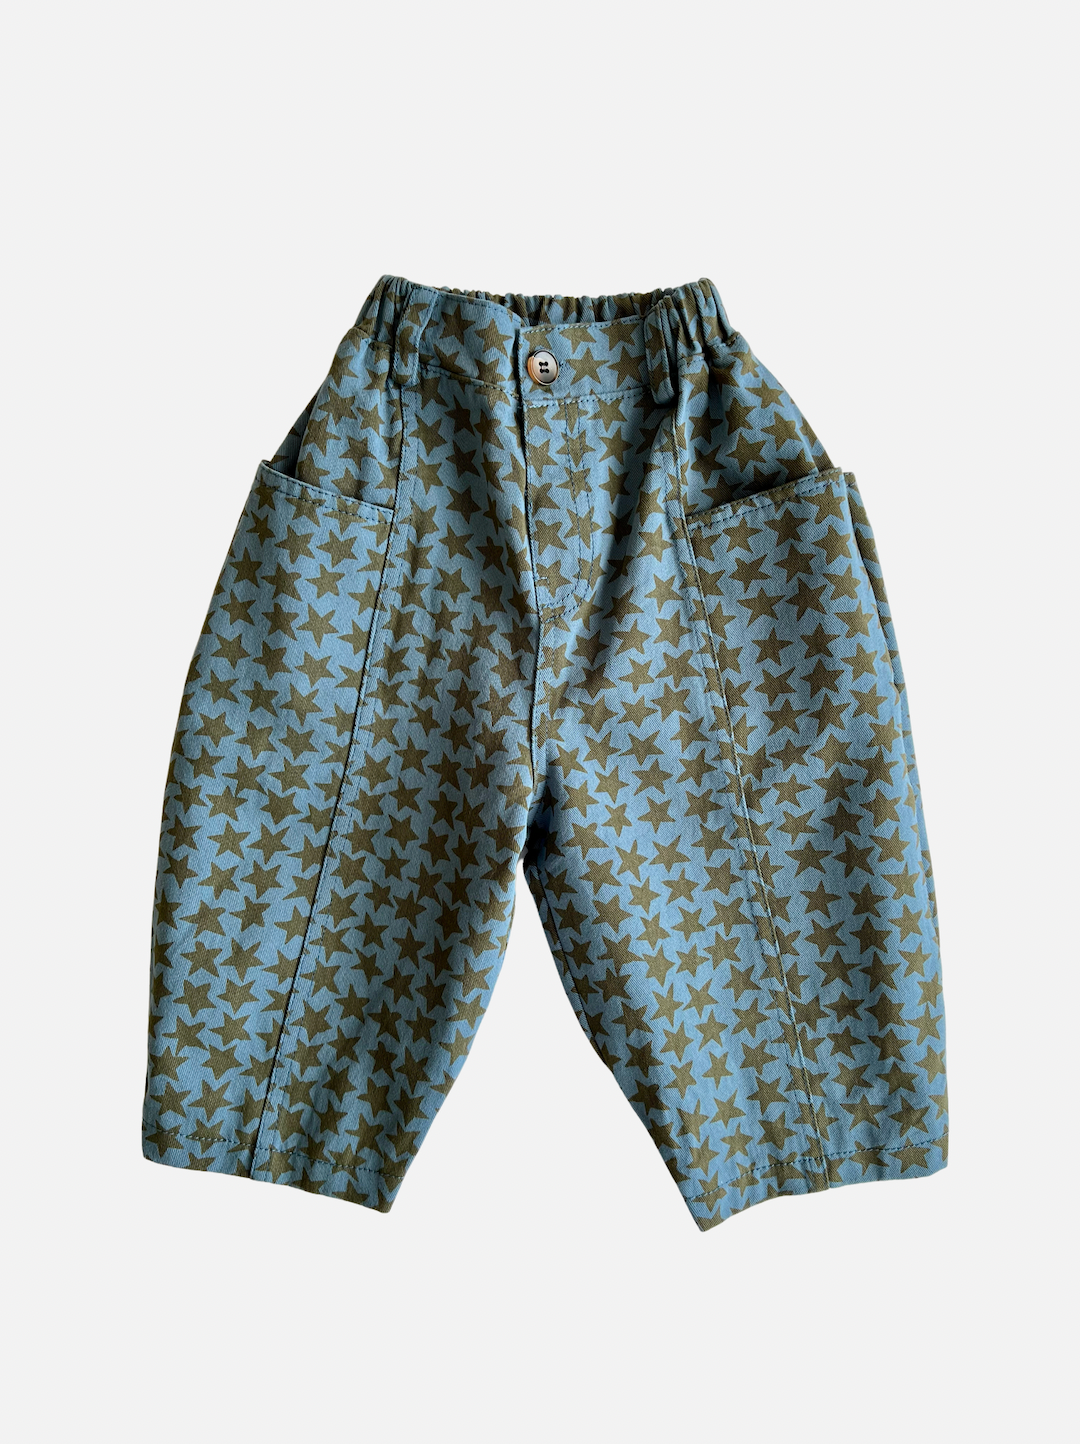 A pair of kids' pants in slate blue with a pattern of olive green stars, and generous side pockets